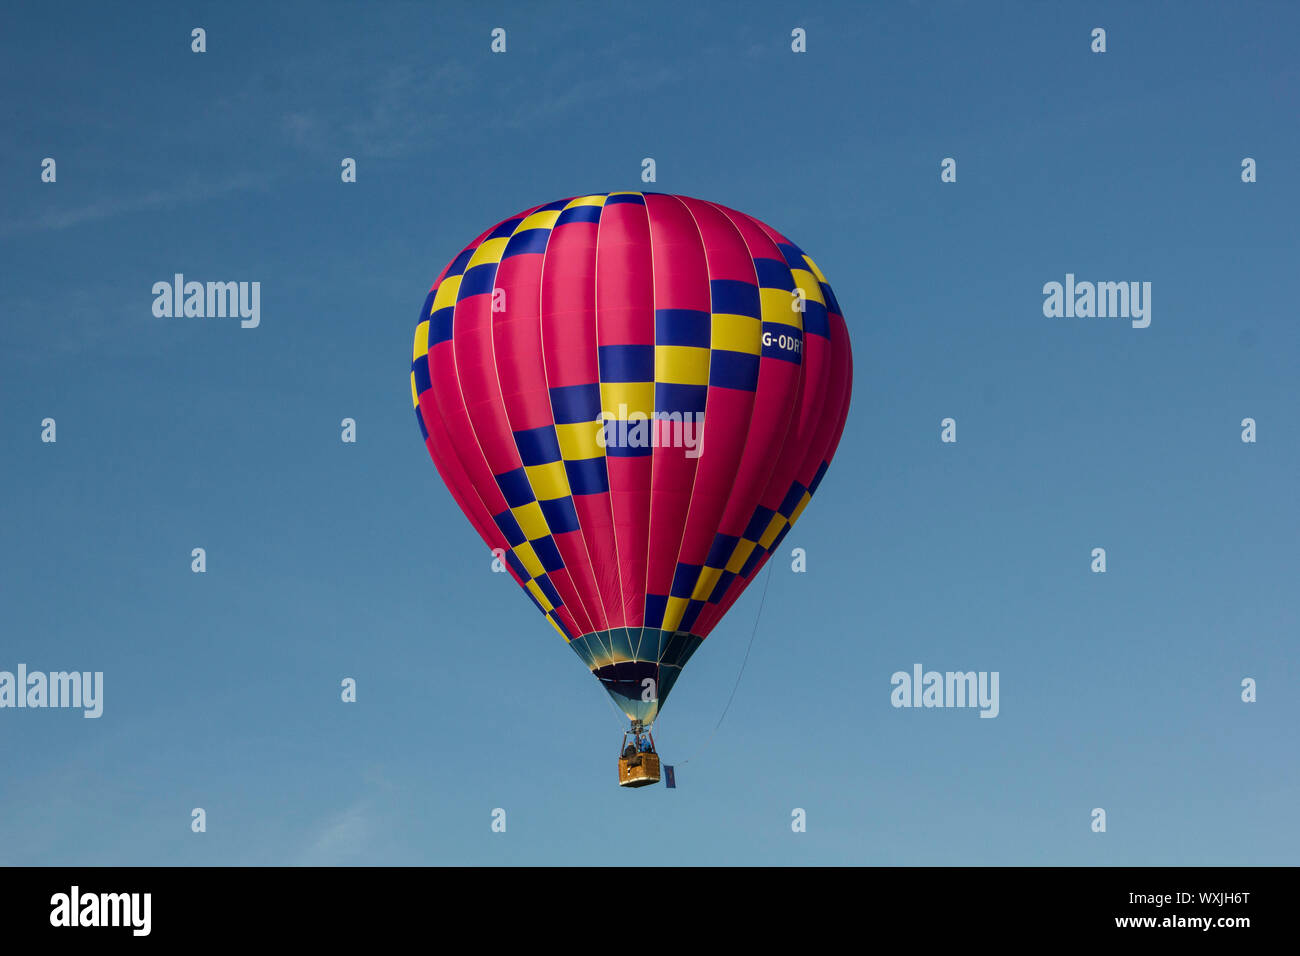 A perfect hot pink with a yellow stripe hot air balloon, flying against a blue sky. Landscape Stock Photo